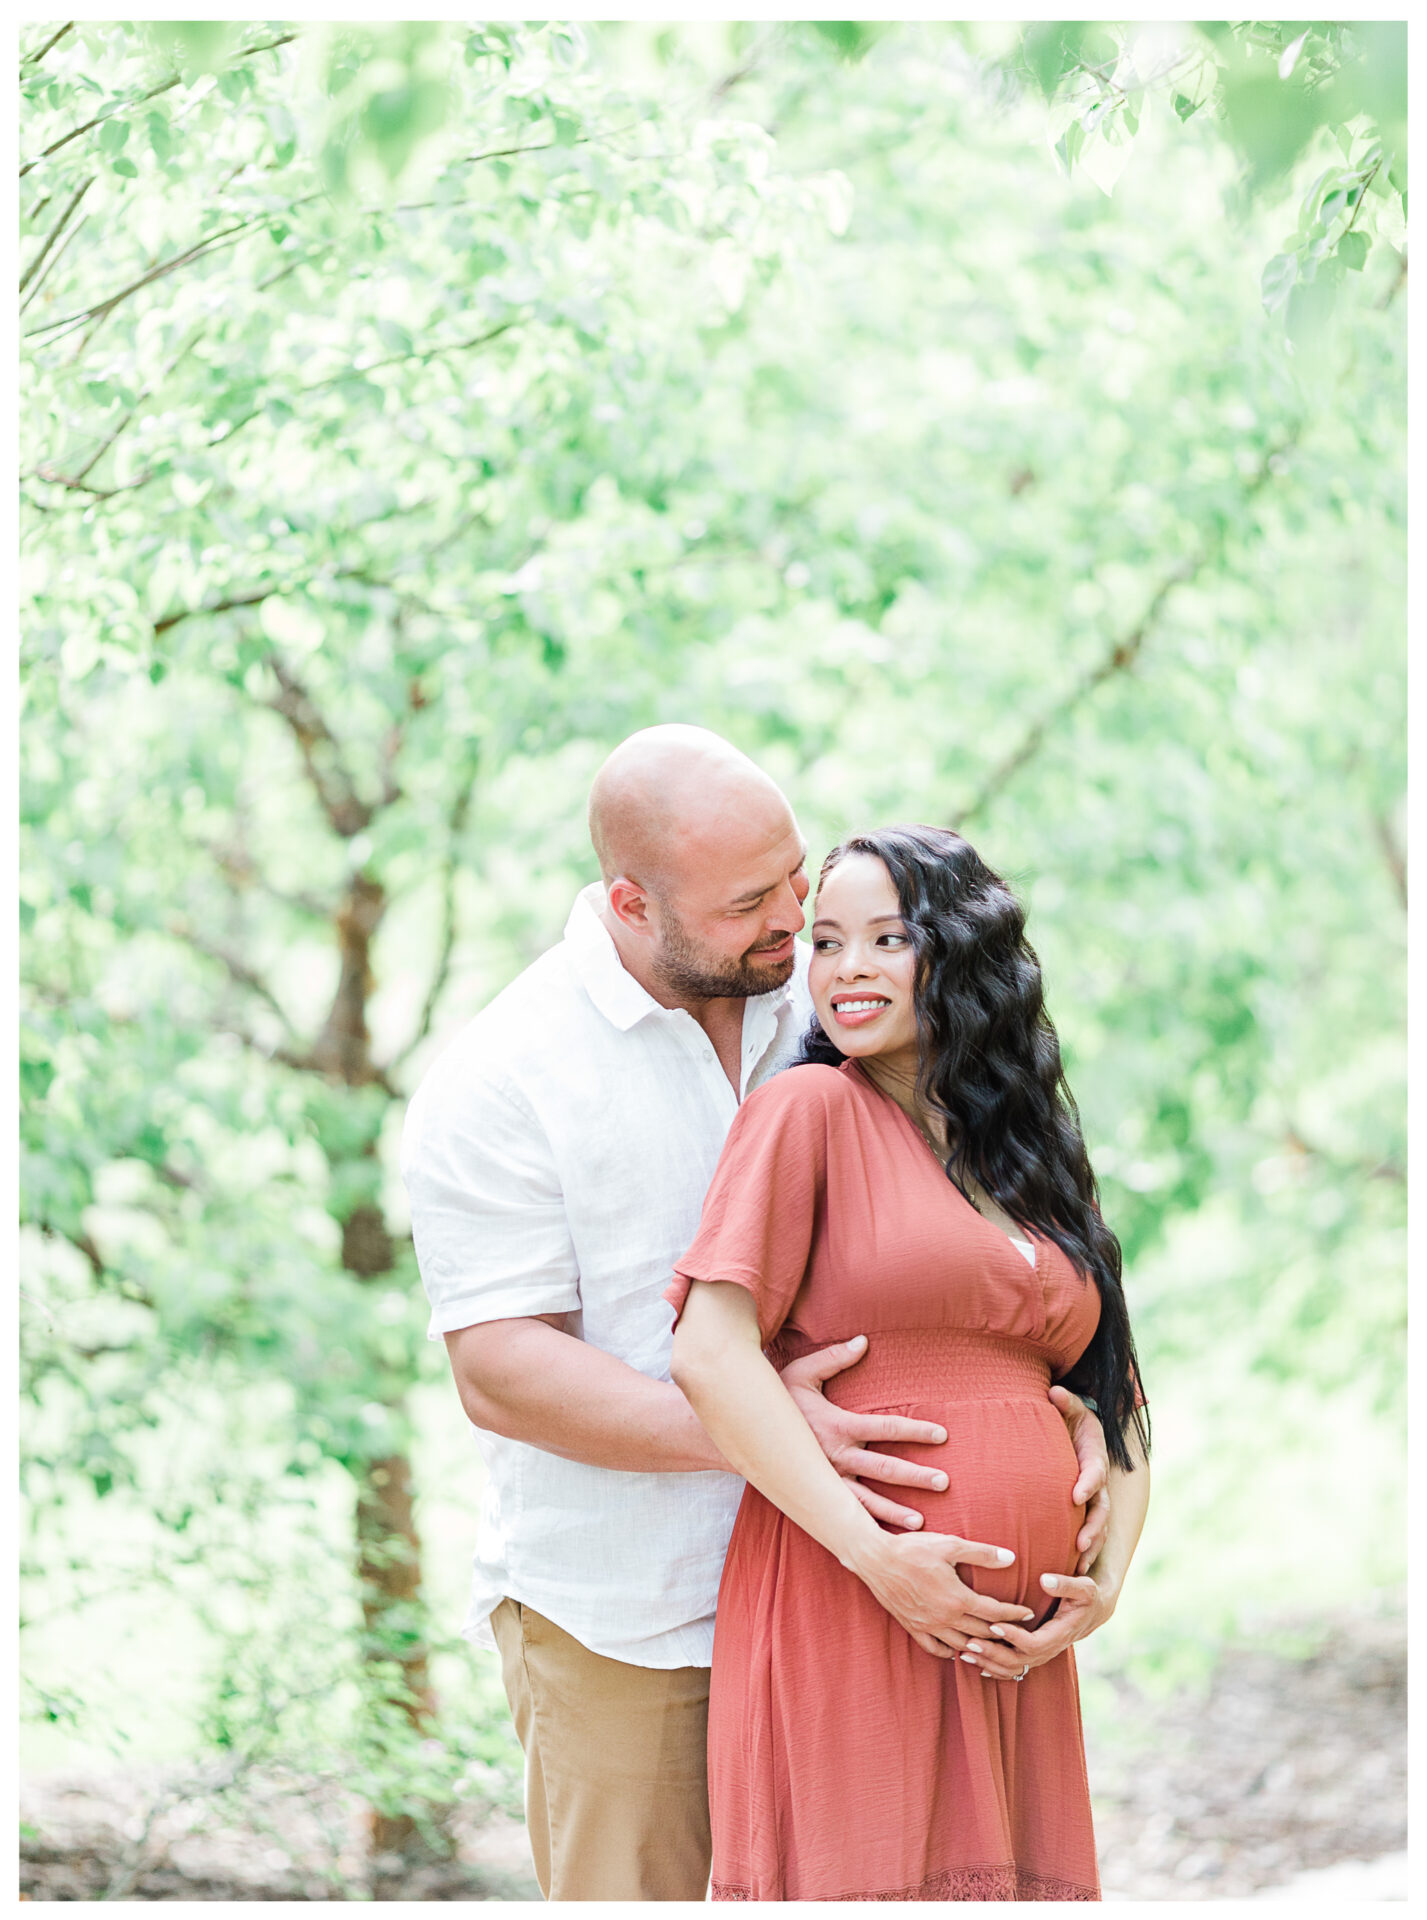 Winter Freire Photography | Dayton OH maternity photography | organic natural light photographers Cincinnati and Dayton Ohio | Organic Family Maternity Session Centerville OH